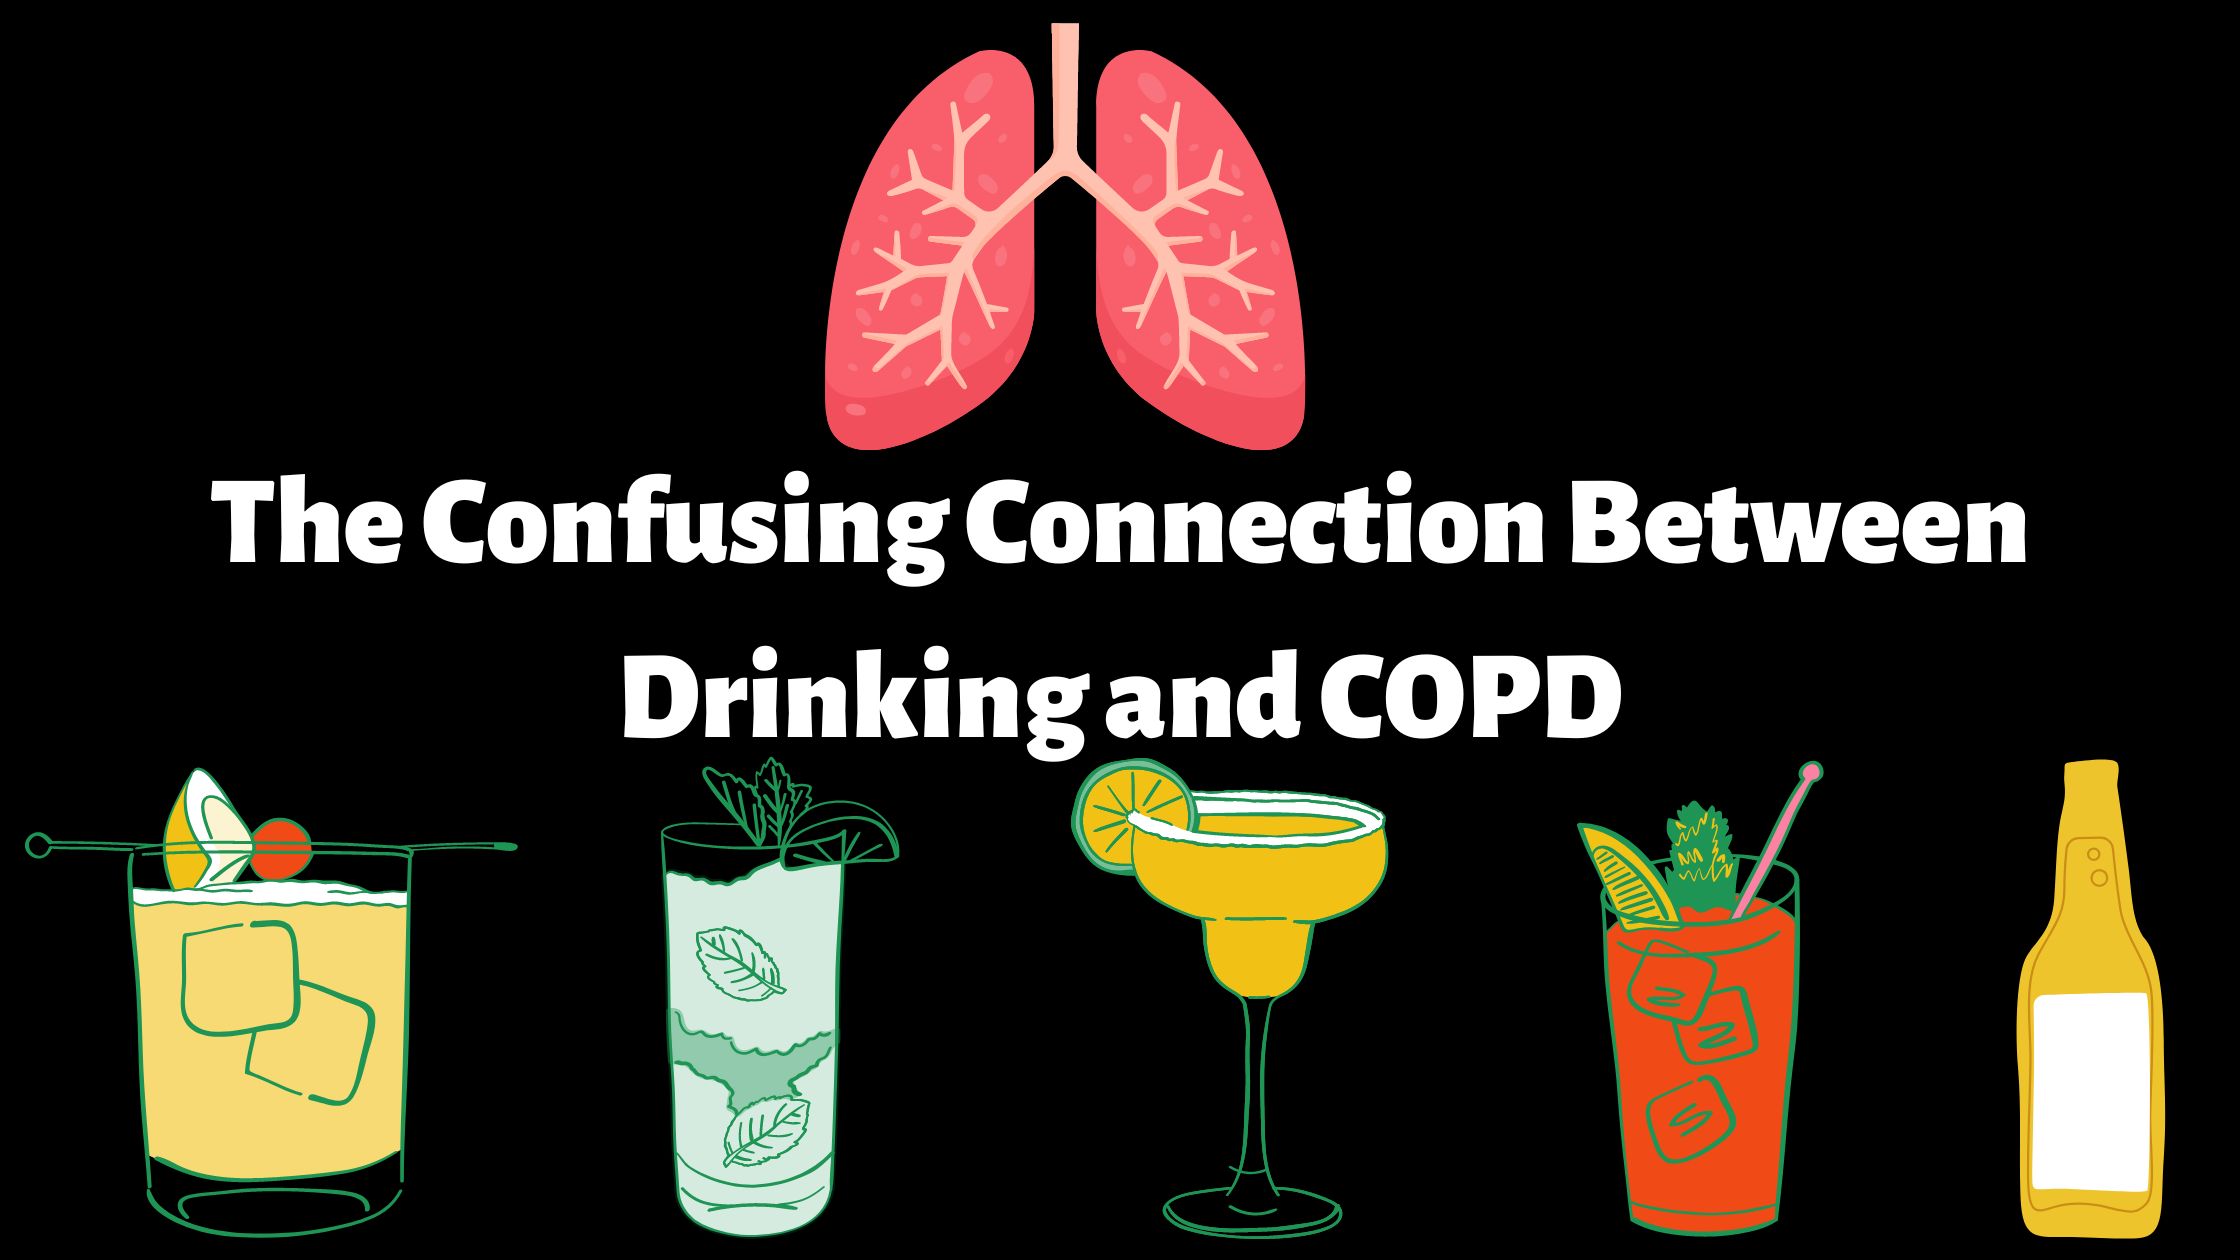 The Confusing Connection Between Drinking and COPD